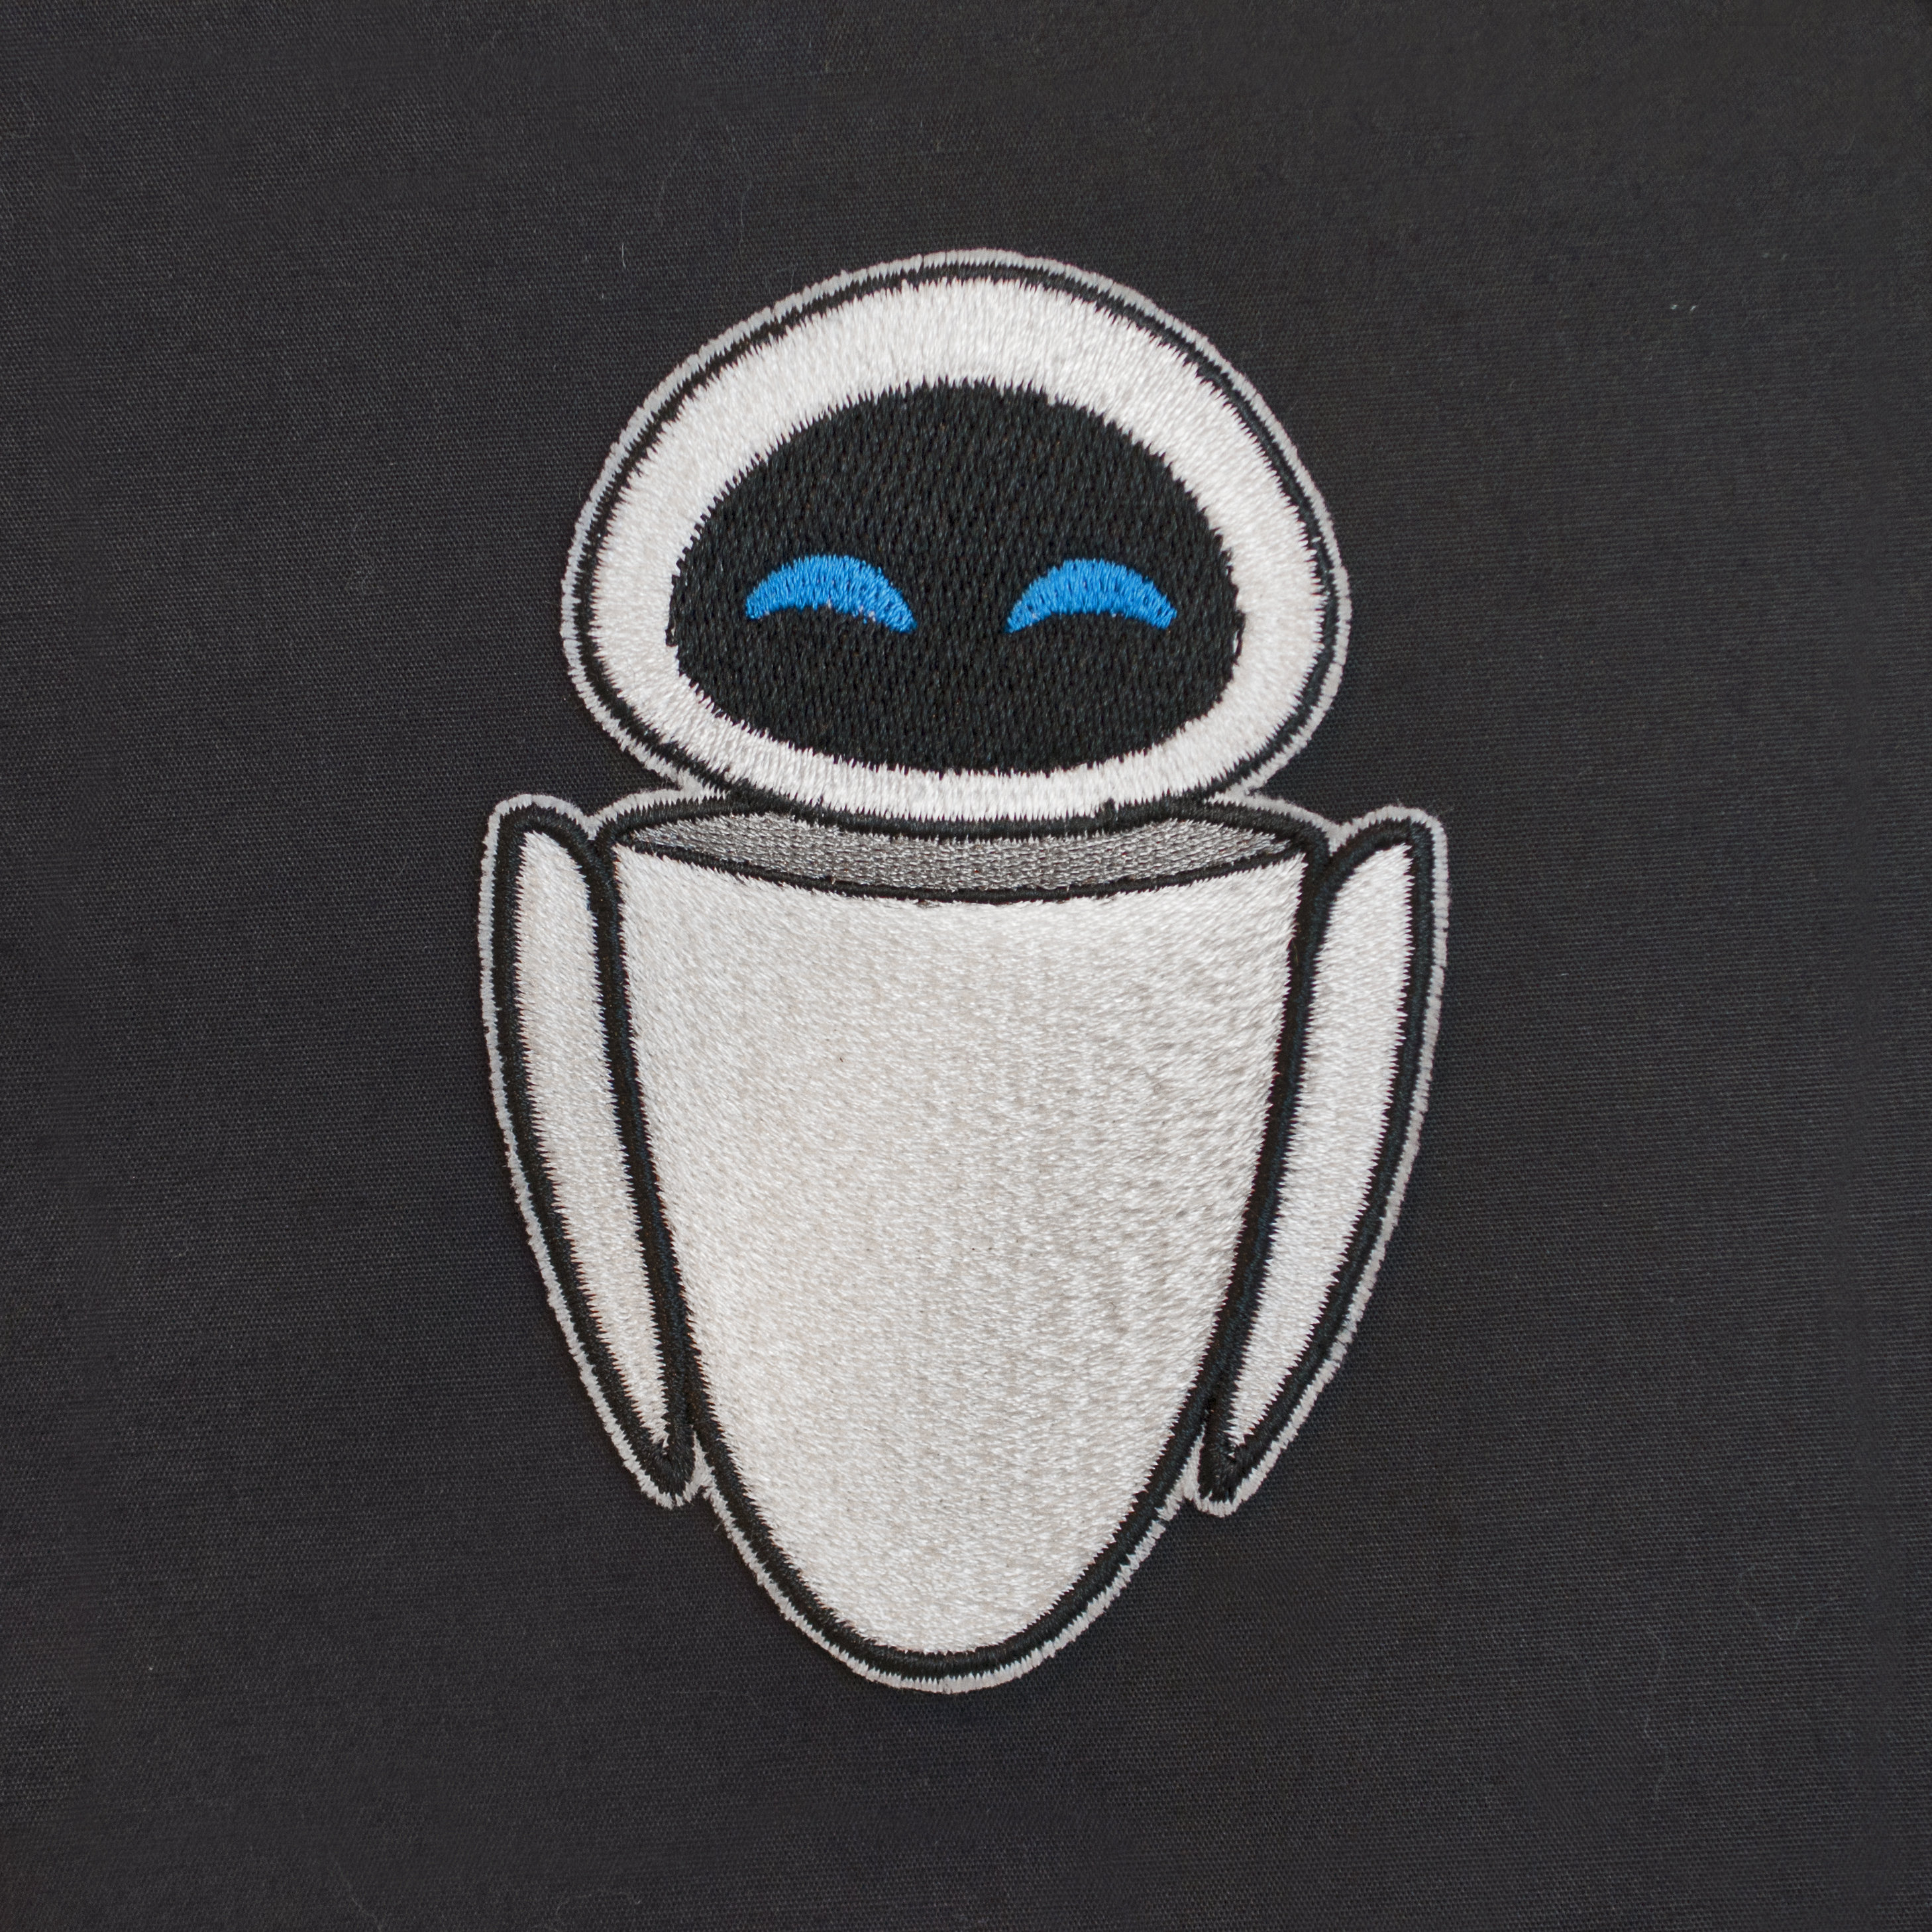 Wall E Rebootwall-e Robot Iron-on Patches For Clothing - Customizable  Appliques